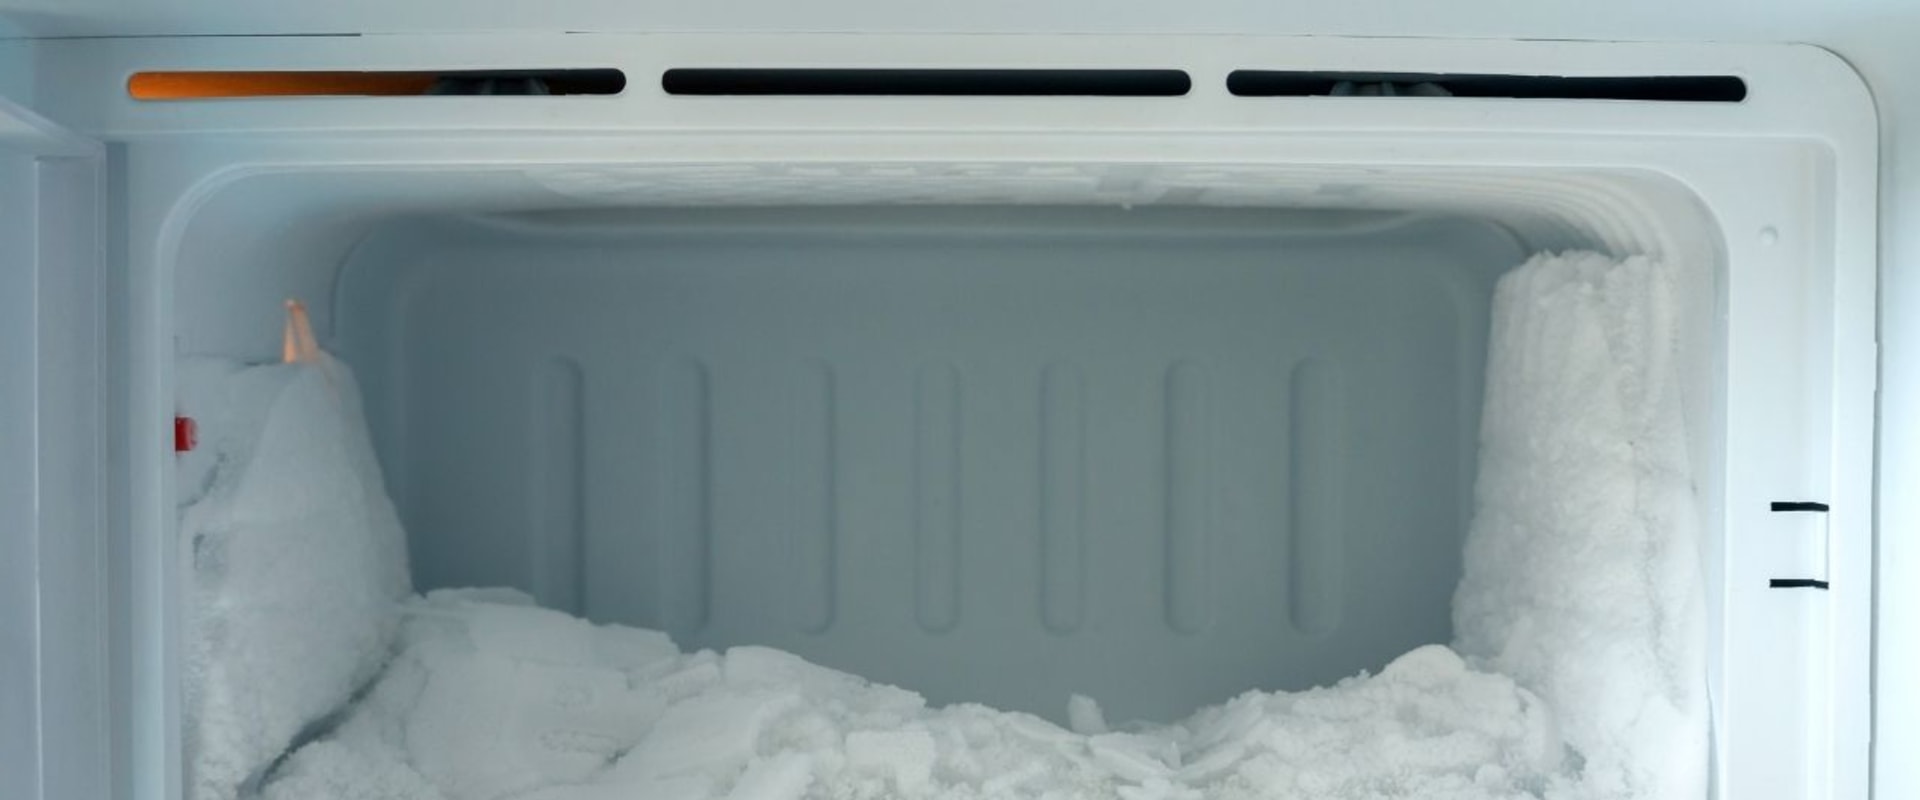 When is it Time to Replace Your Freezer?